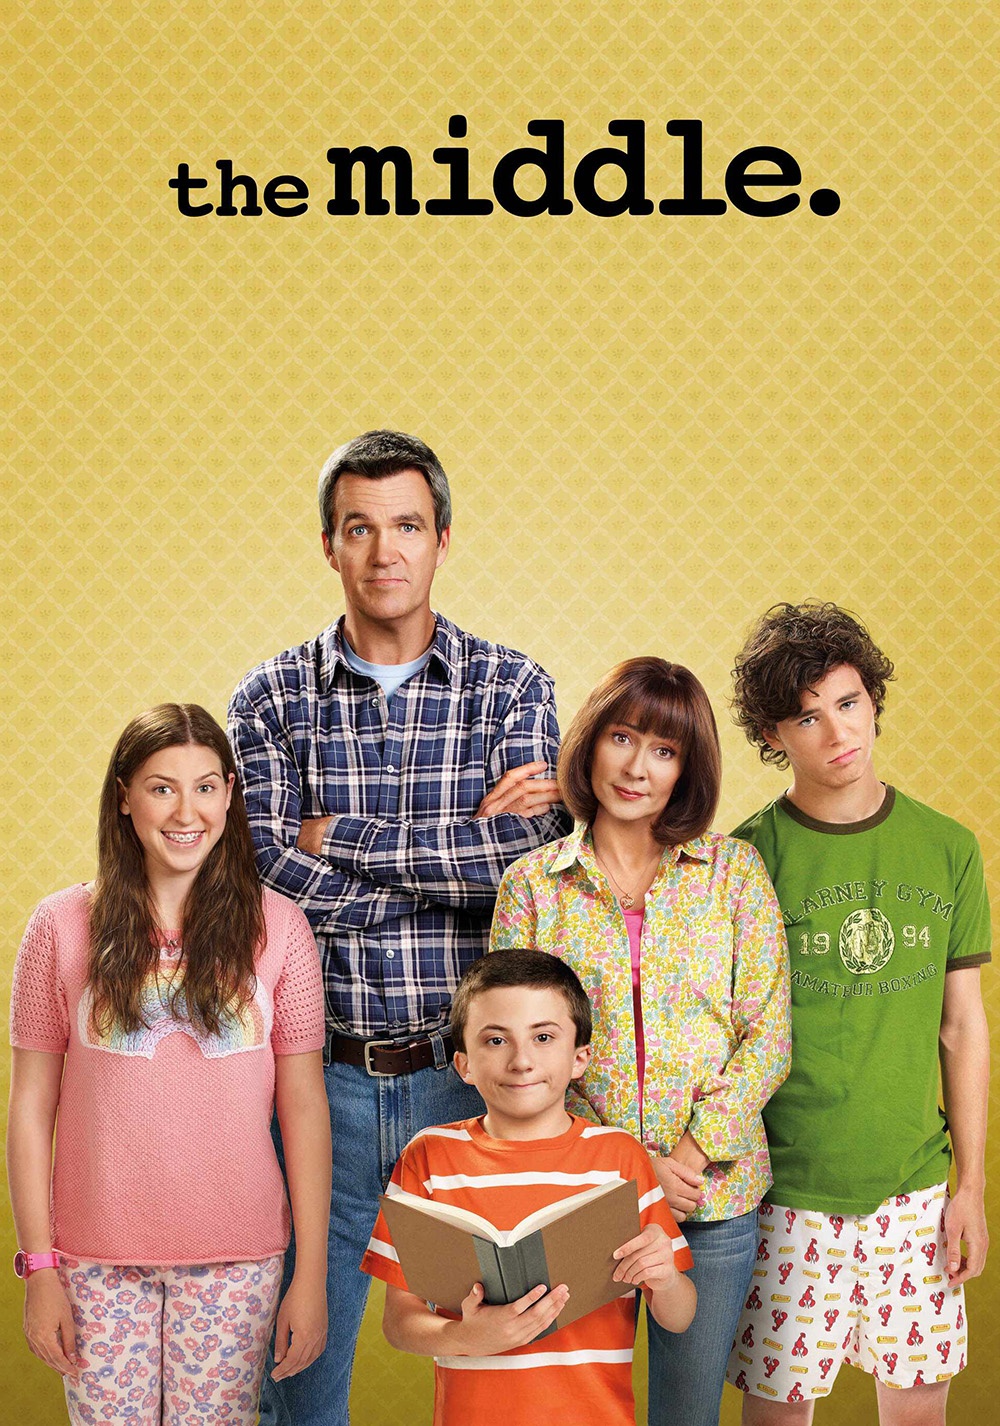 Why American Sitcom “The Middle” is One of the Best Family Comedies Ever 4